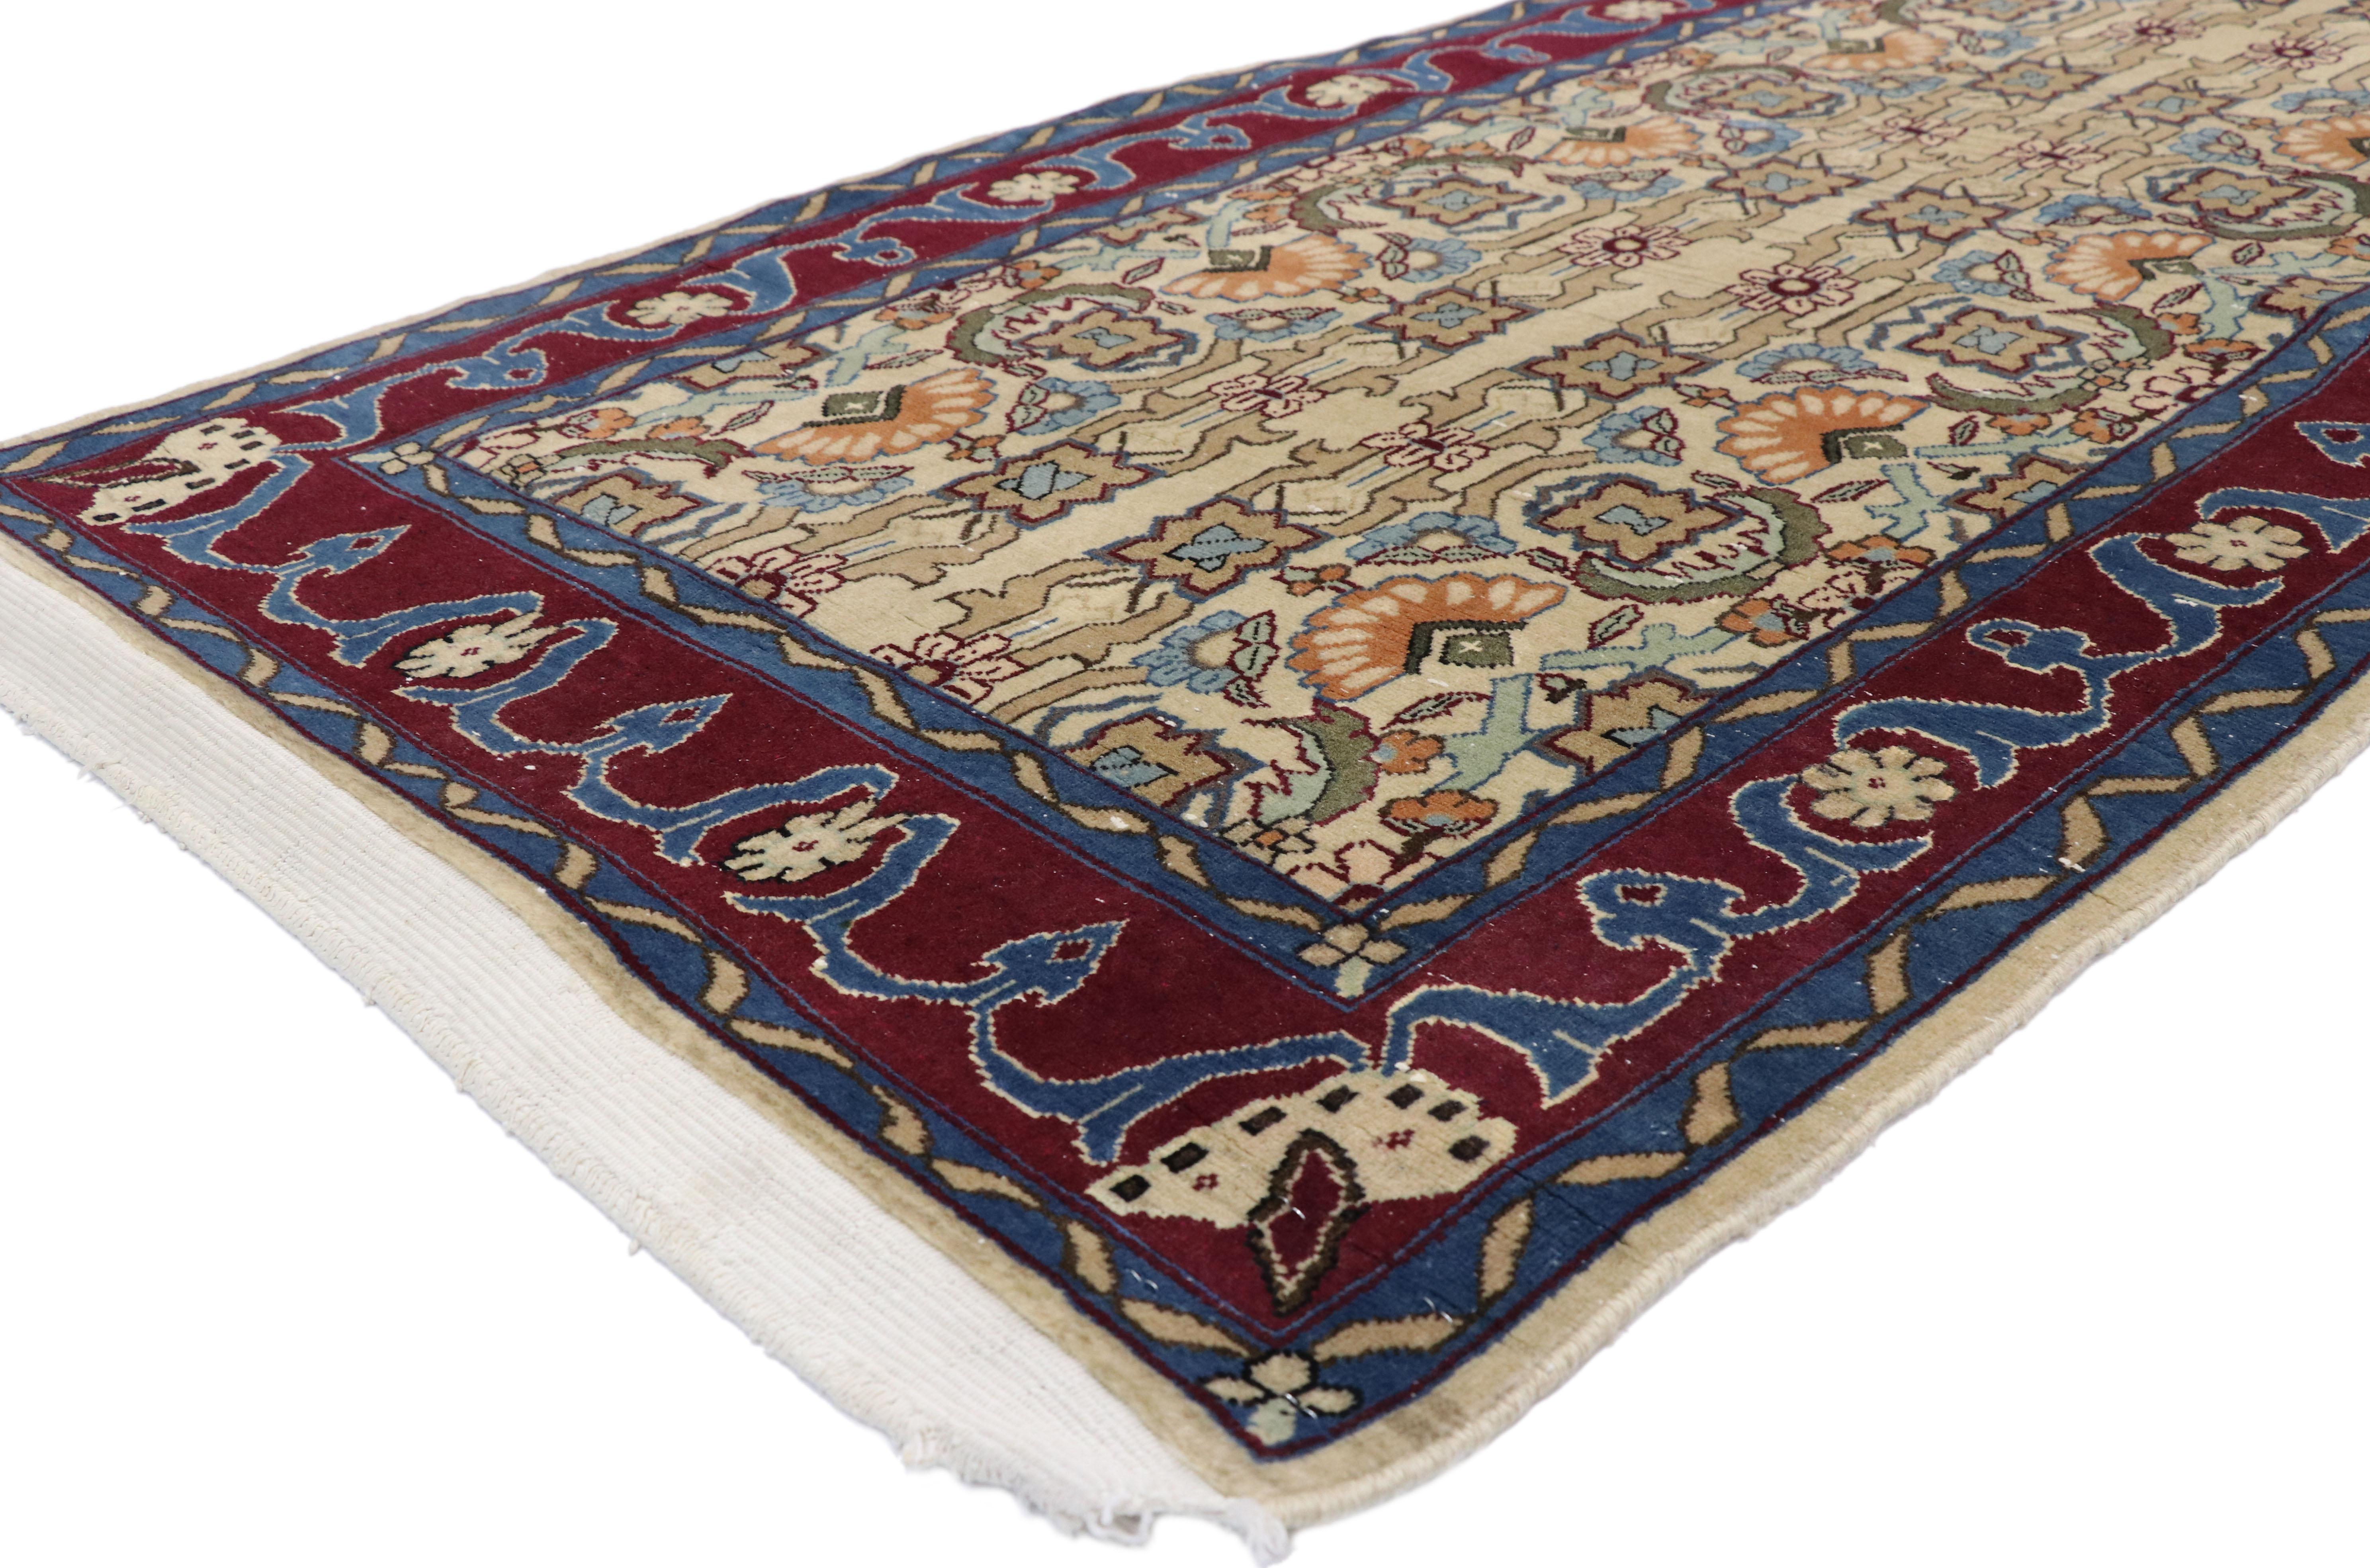 76575 vintage Persian Yazd runner, long hallway runner. Displaying balanced symmetry and bold botanical pattern, this hand knotted wool vintage Persian Yazd runner astounds with its beauty. It features an intricate geometric pattern composed of